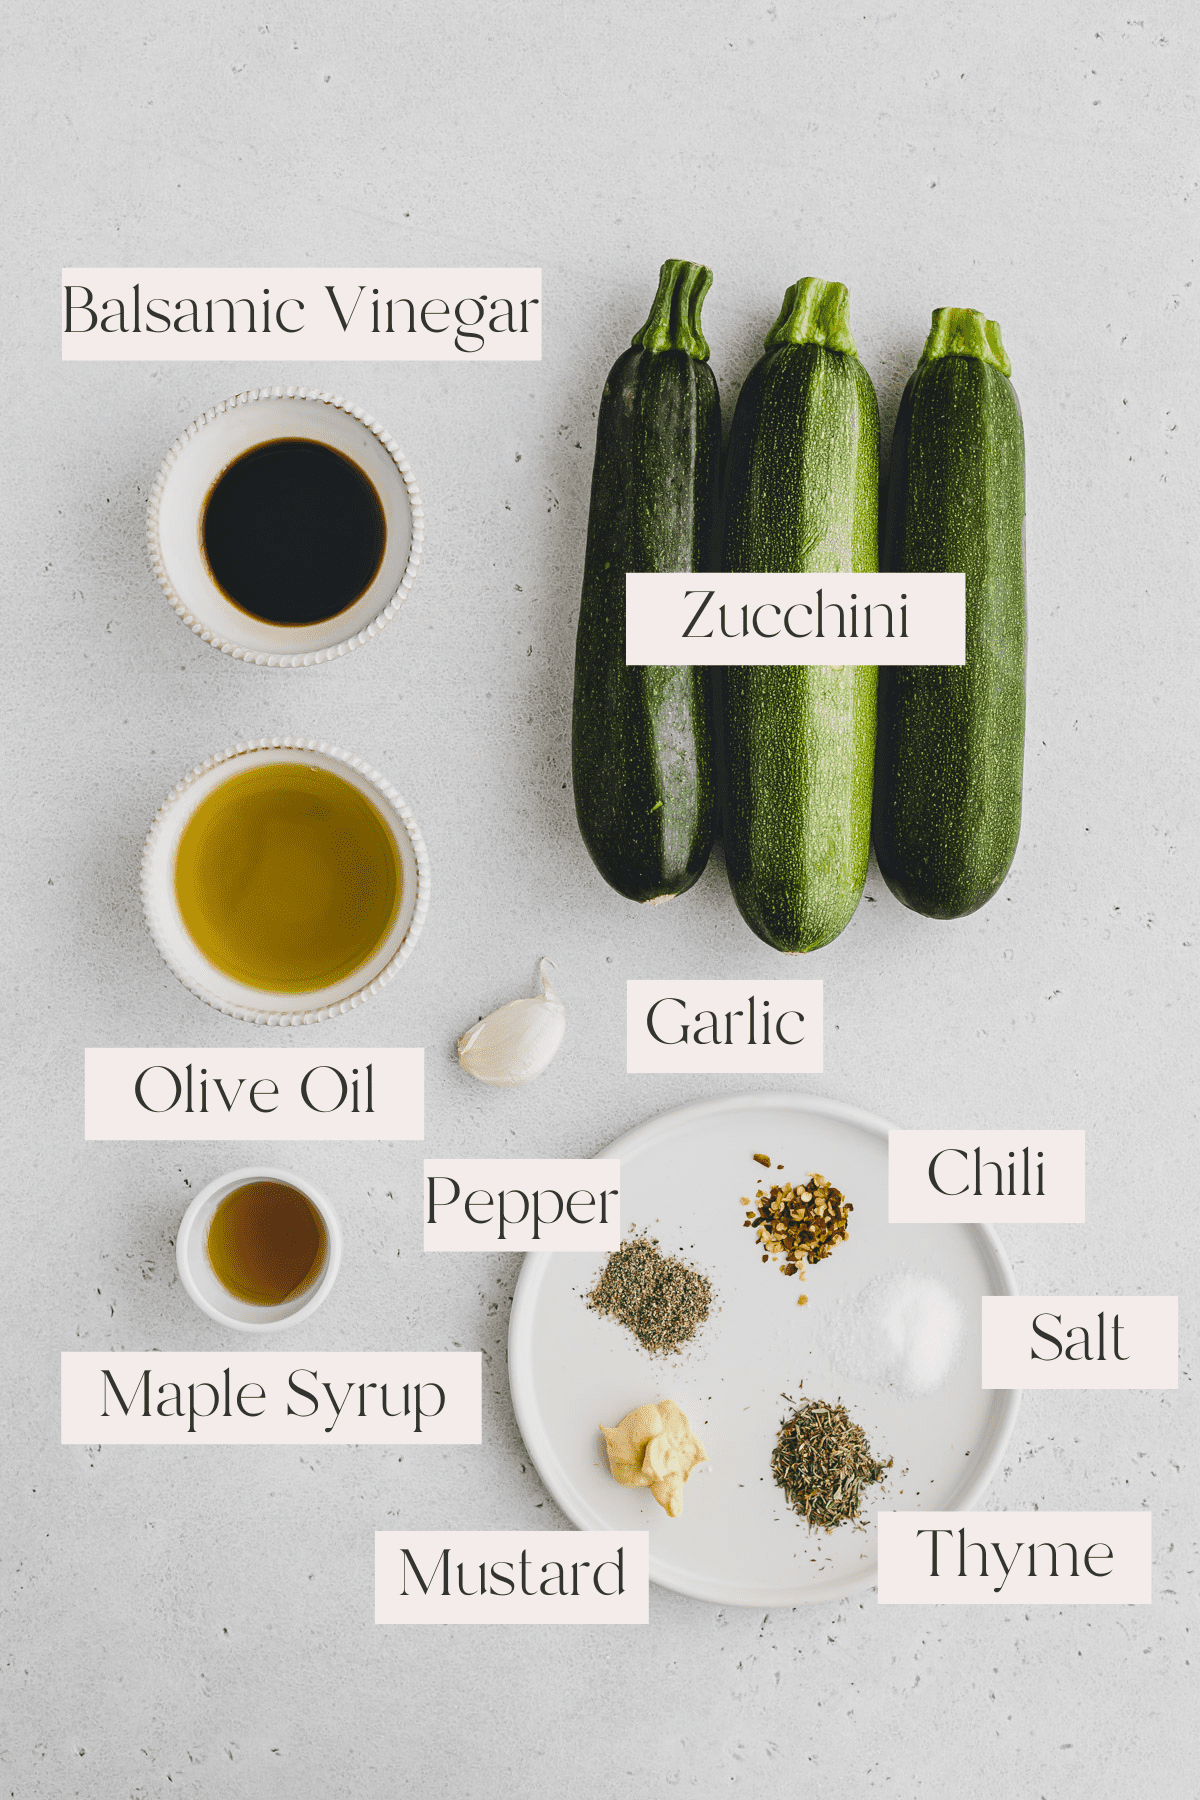 Top view of ingredients for grilled zucchini including zucchini, balsamic vinegar, olive oil, garlic clove, maple syrup, mustard, thyme, pepper, salt and red pepper flakes. 